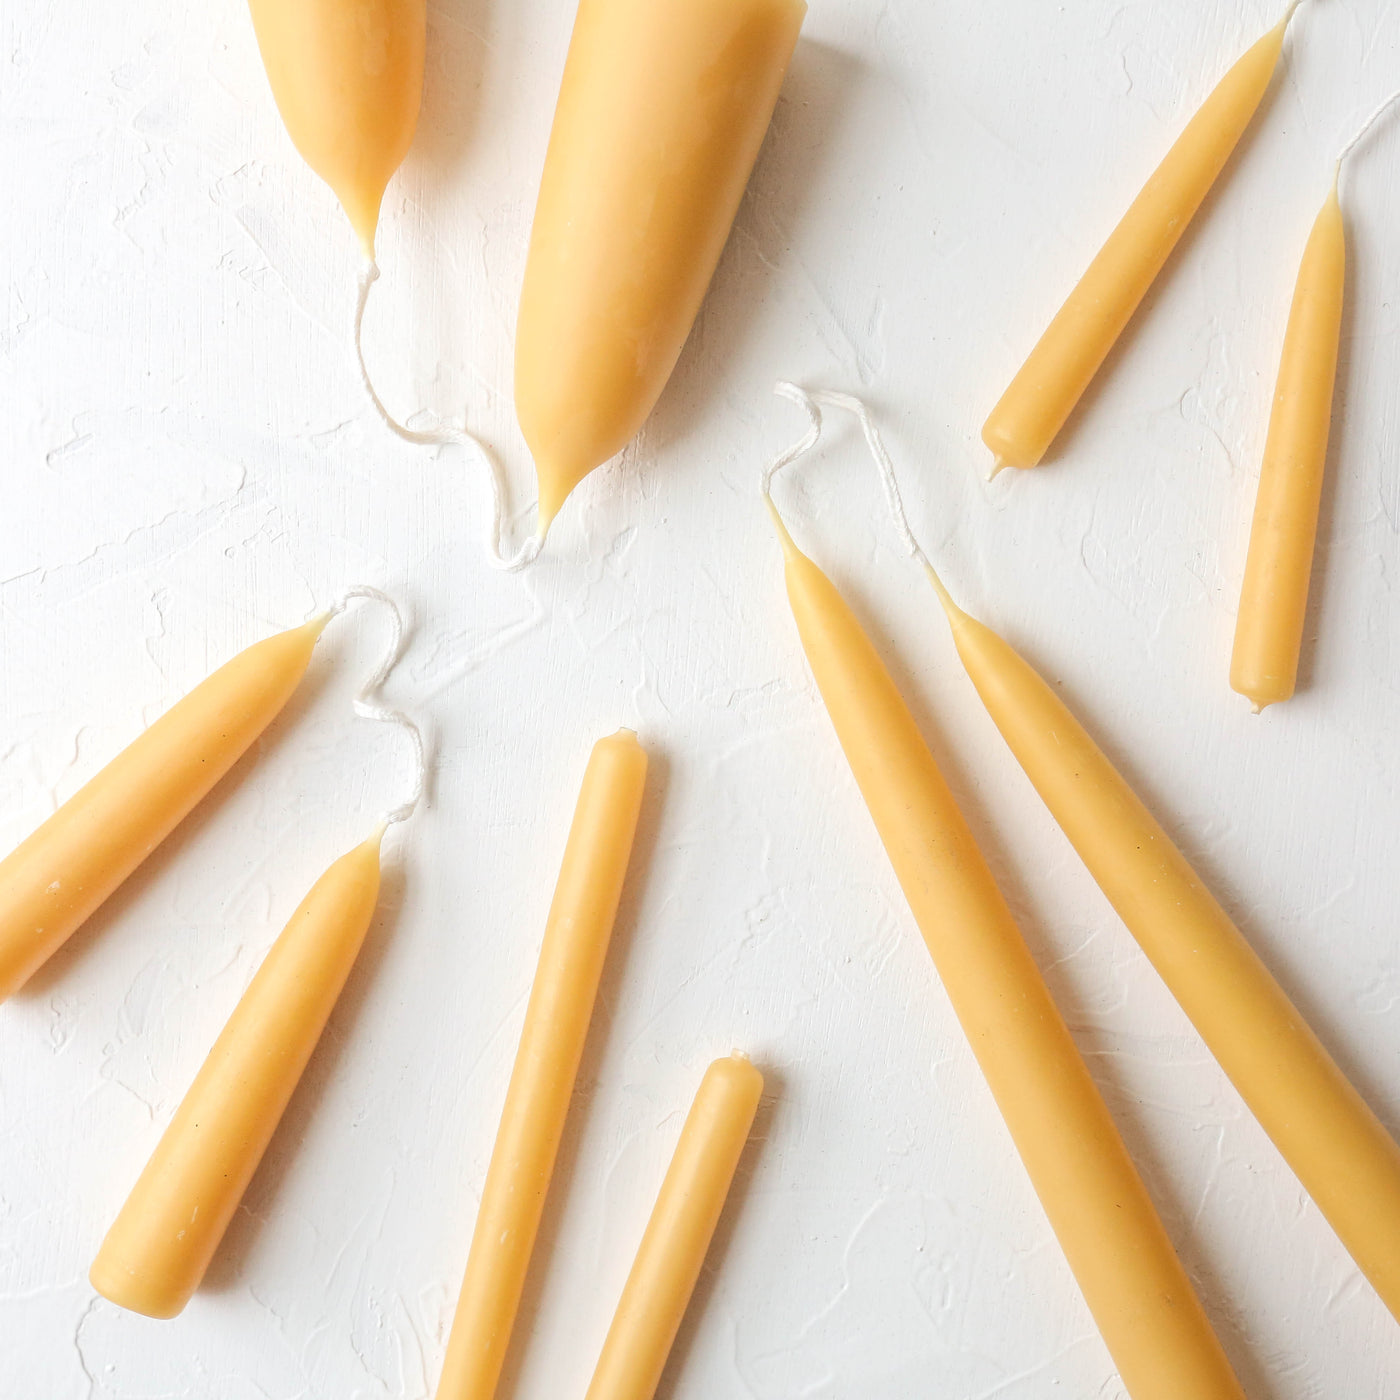 23cm Hand Dipped Beeswax Candles - Pair